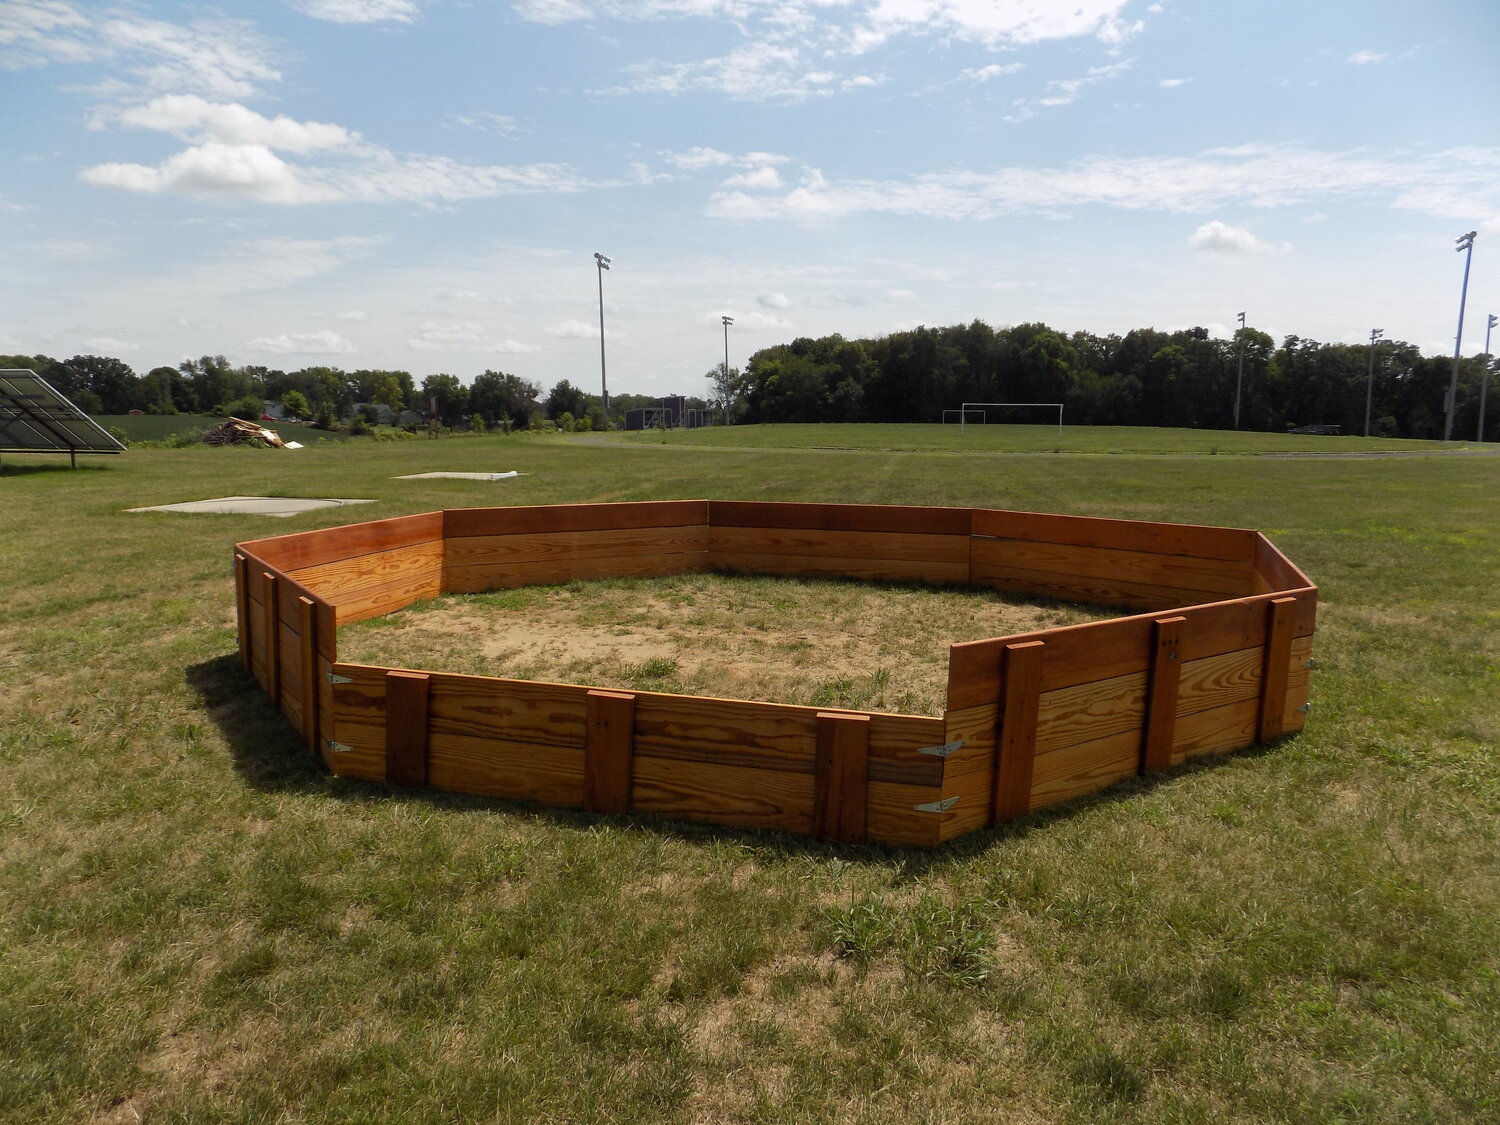 Hillcrest Academy’s new gaga pit was constructed from the bleachers salvaged from an upgrade to the gym two years ago.